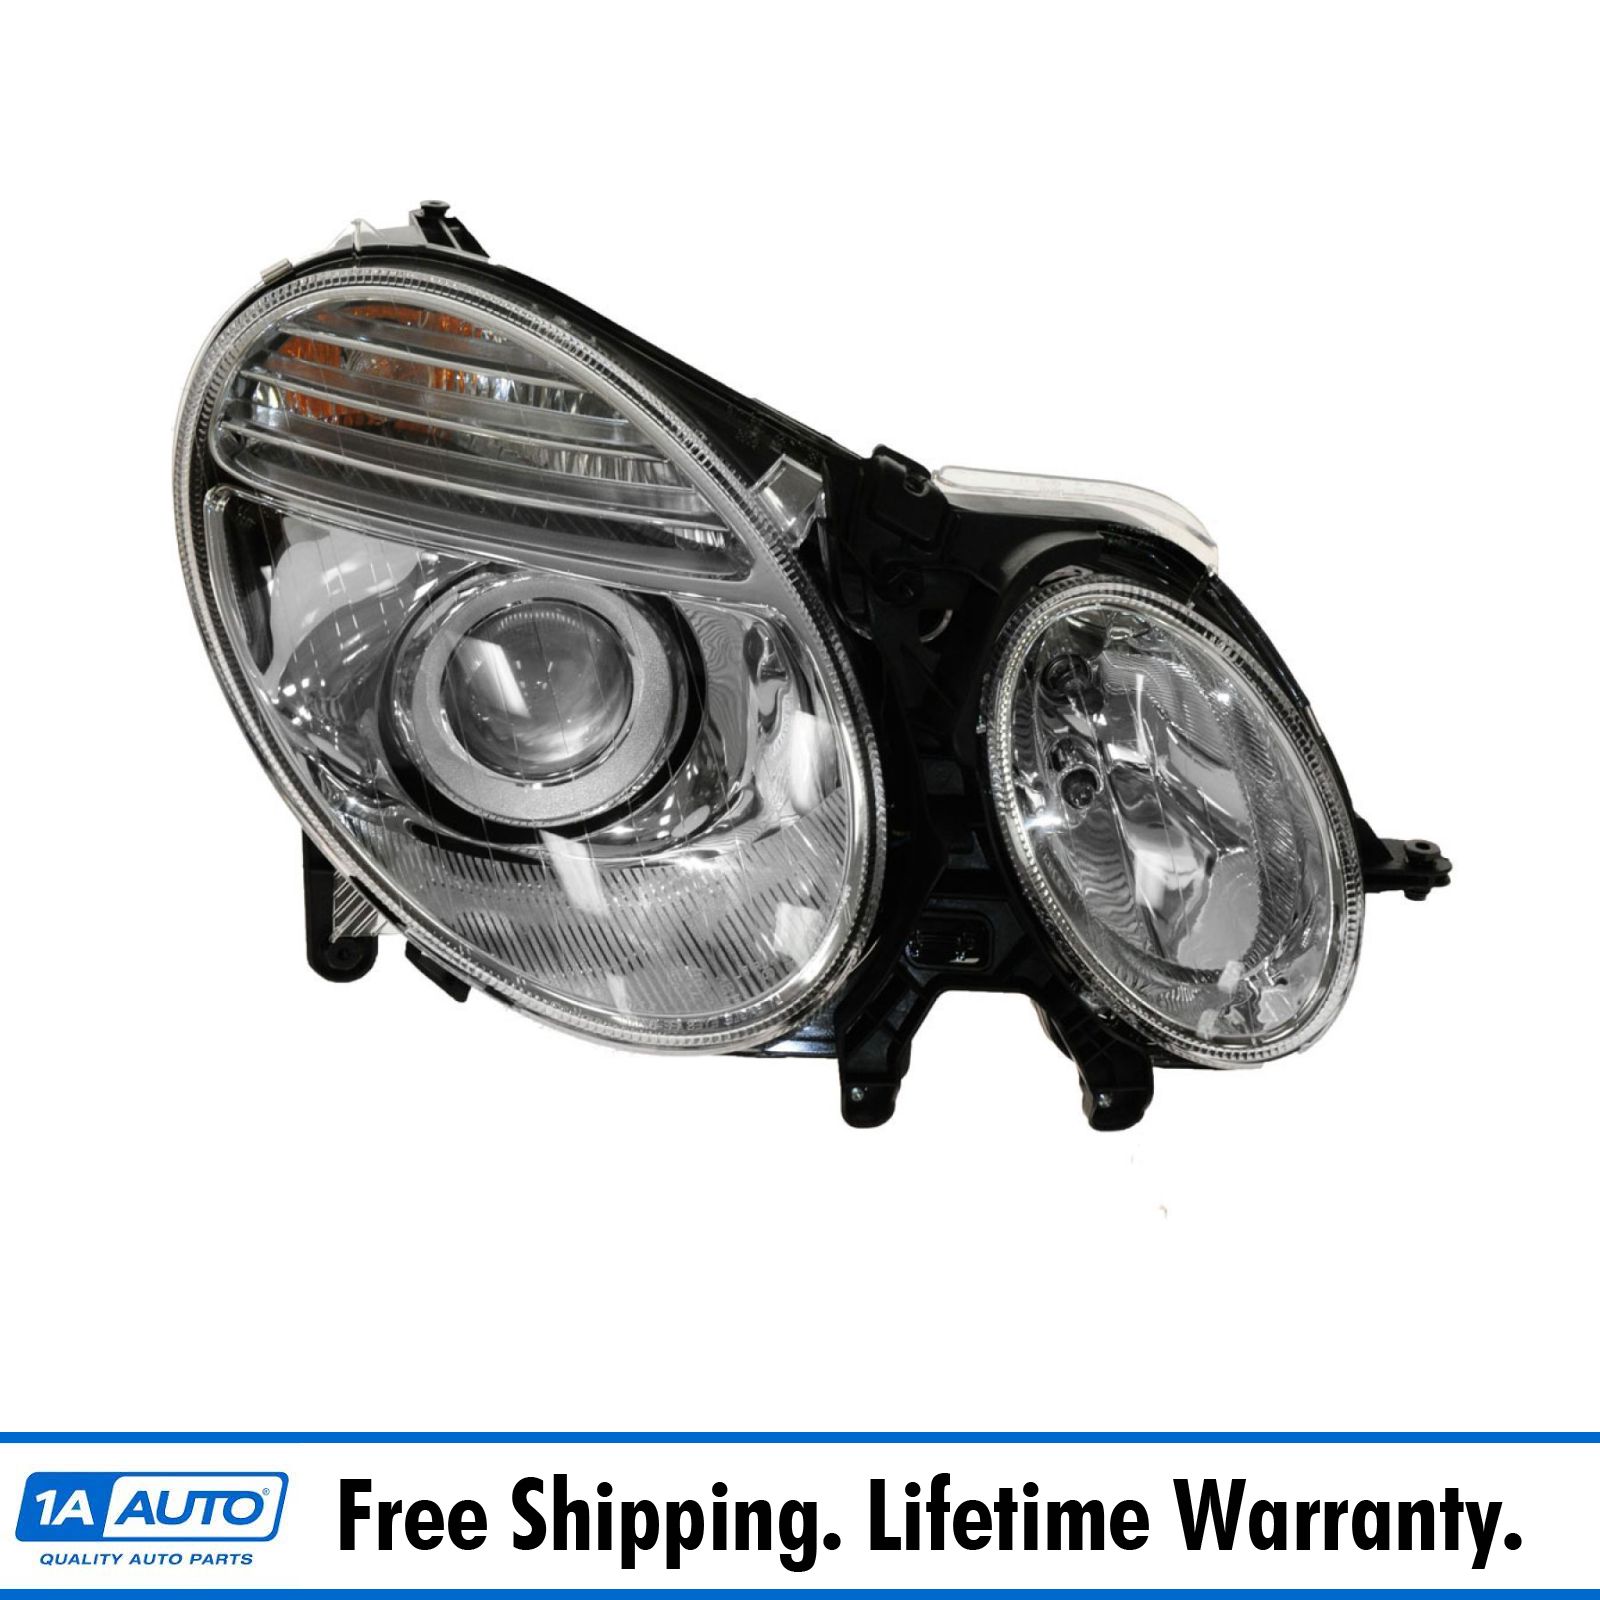 2003-09 Mercedes Benz E320 Headlight XENON (without Ballast) & without Curve Lighting Passenger Side